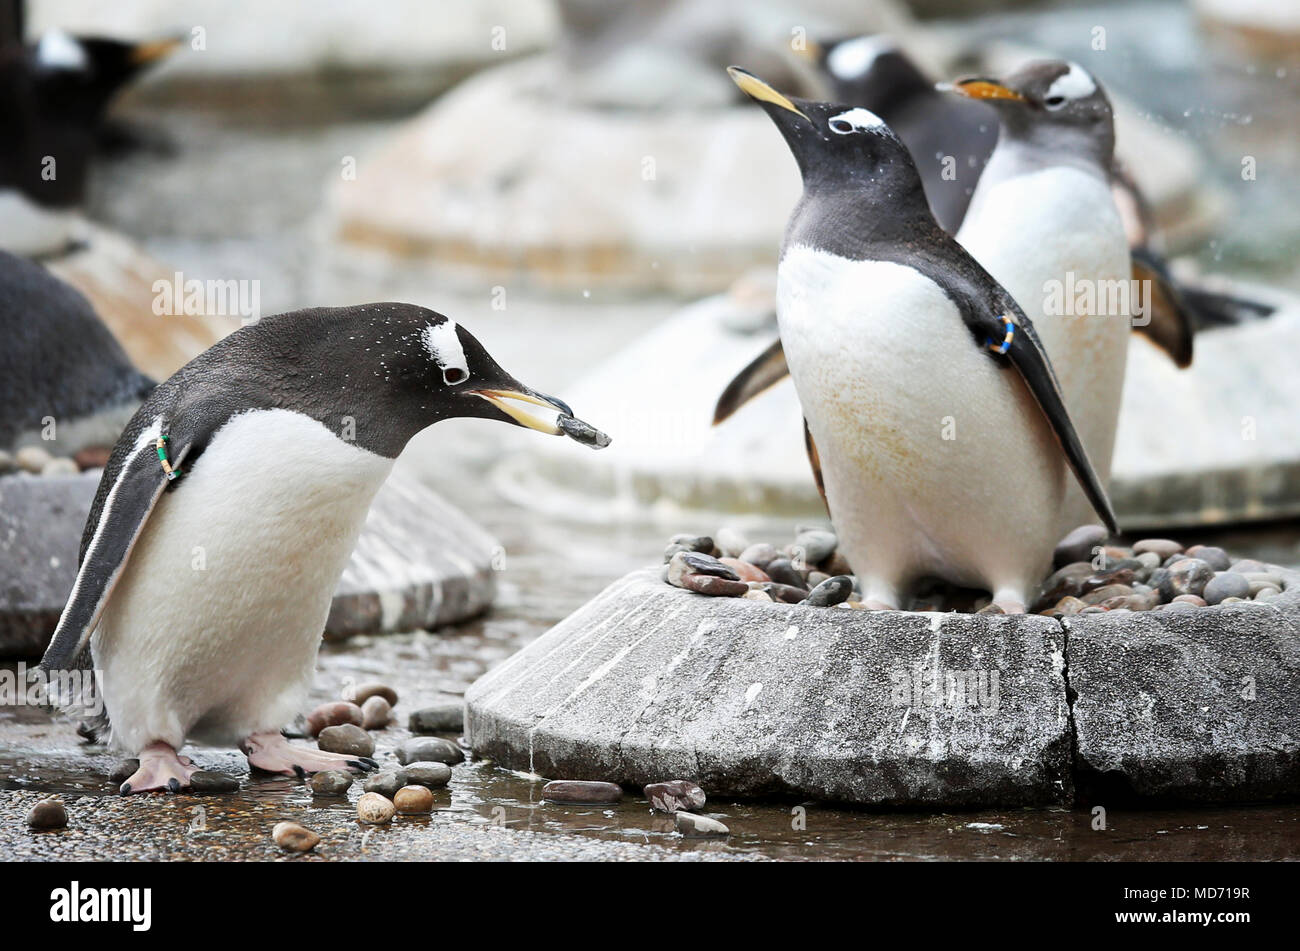 Edinburgh Zoo's Gentoo penguins begin their courtship displays, with the females sitting on nesting rings, the males sift through pebbles looking for the smoothest one to present to their chosen mate. Stock Photo